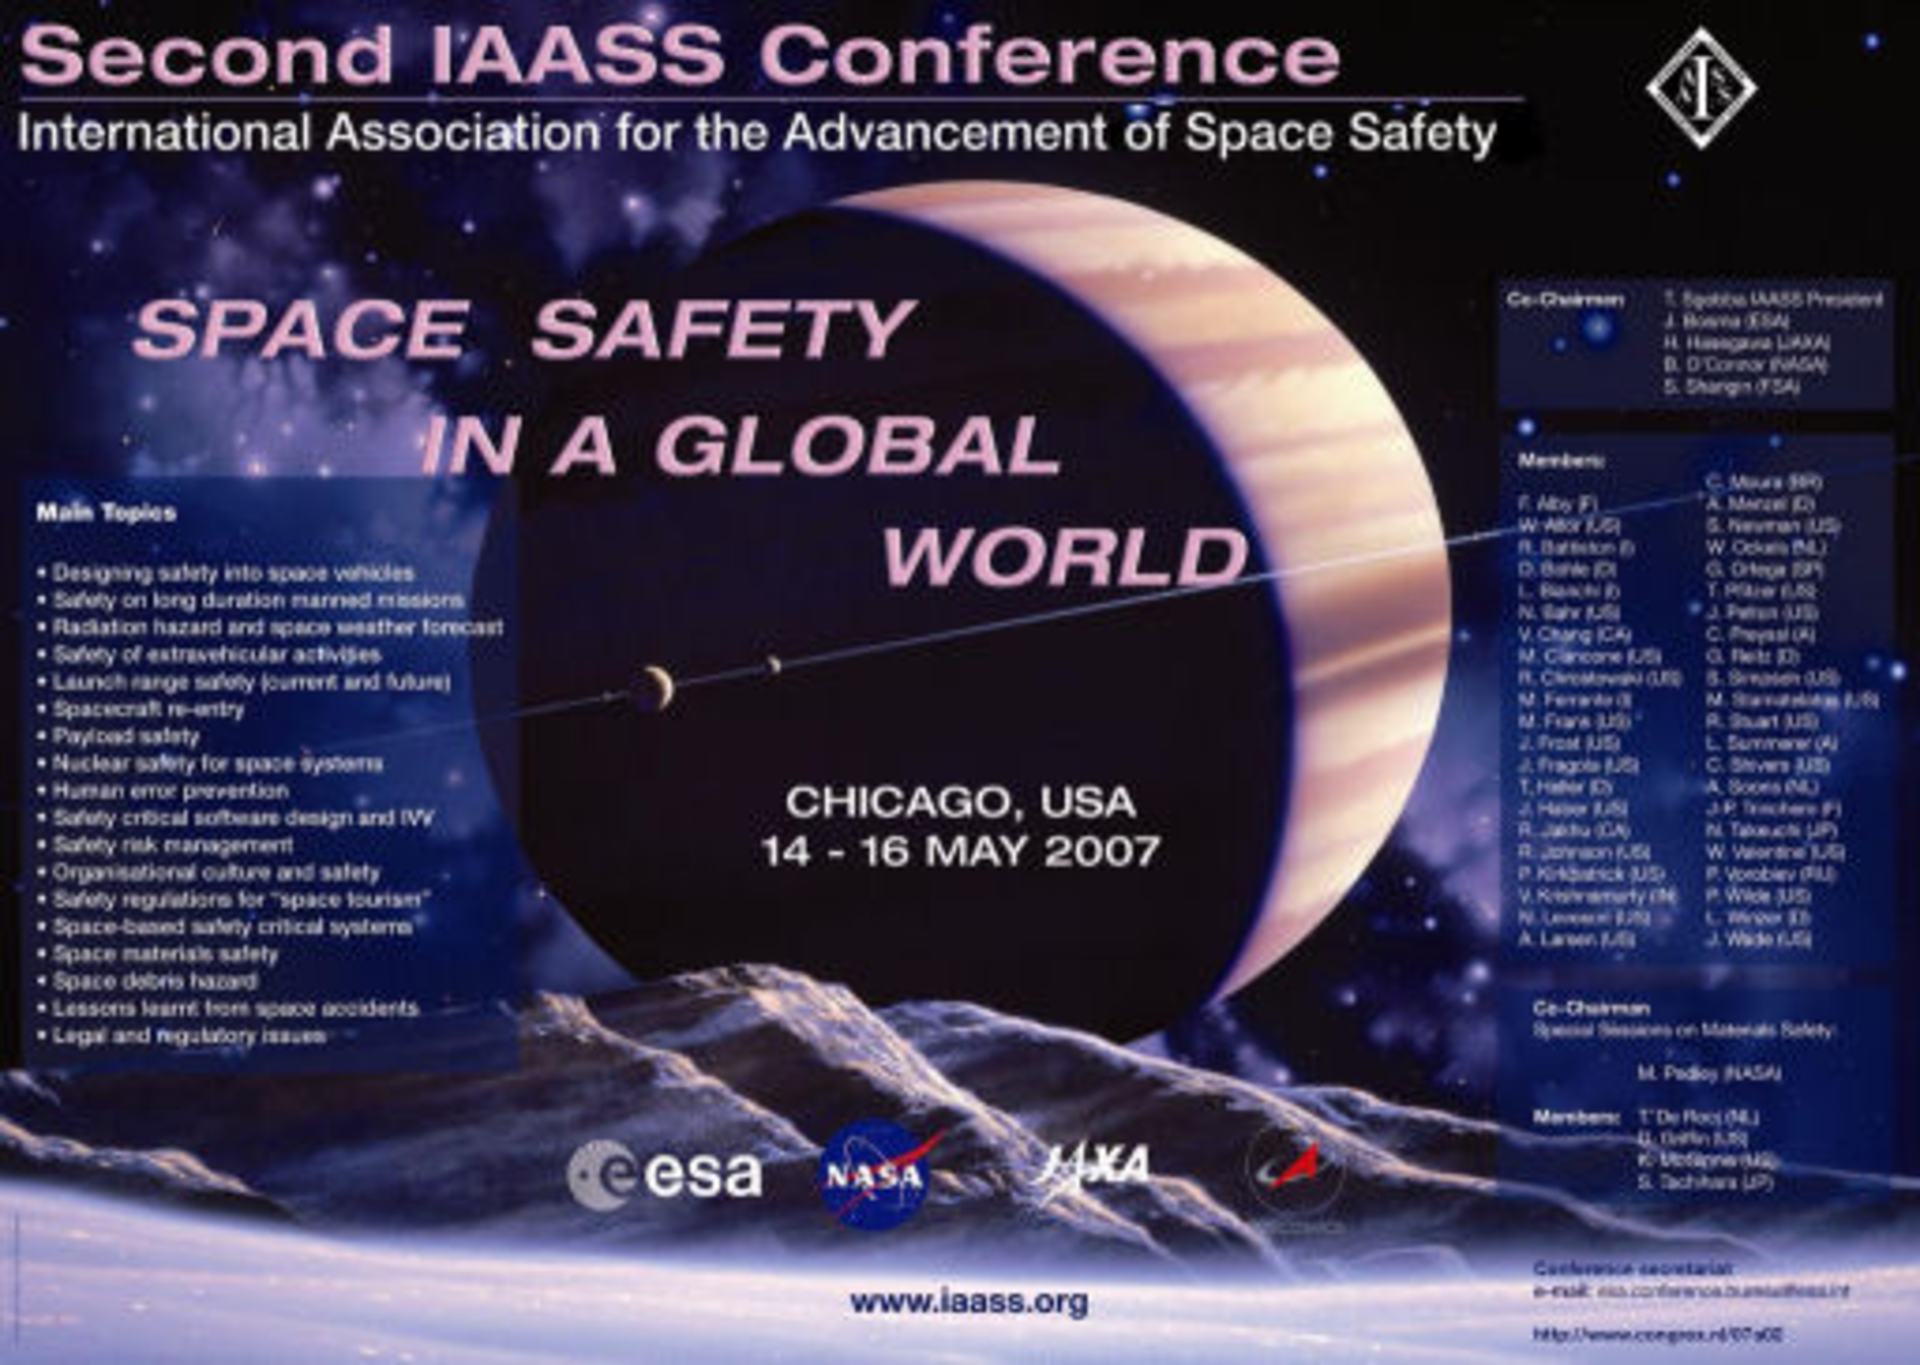 IAASS second conference: Space Safety in a Global World